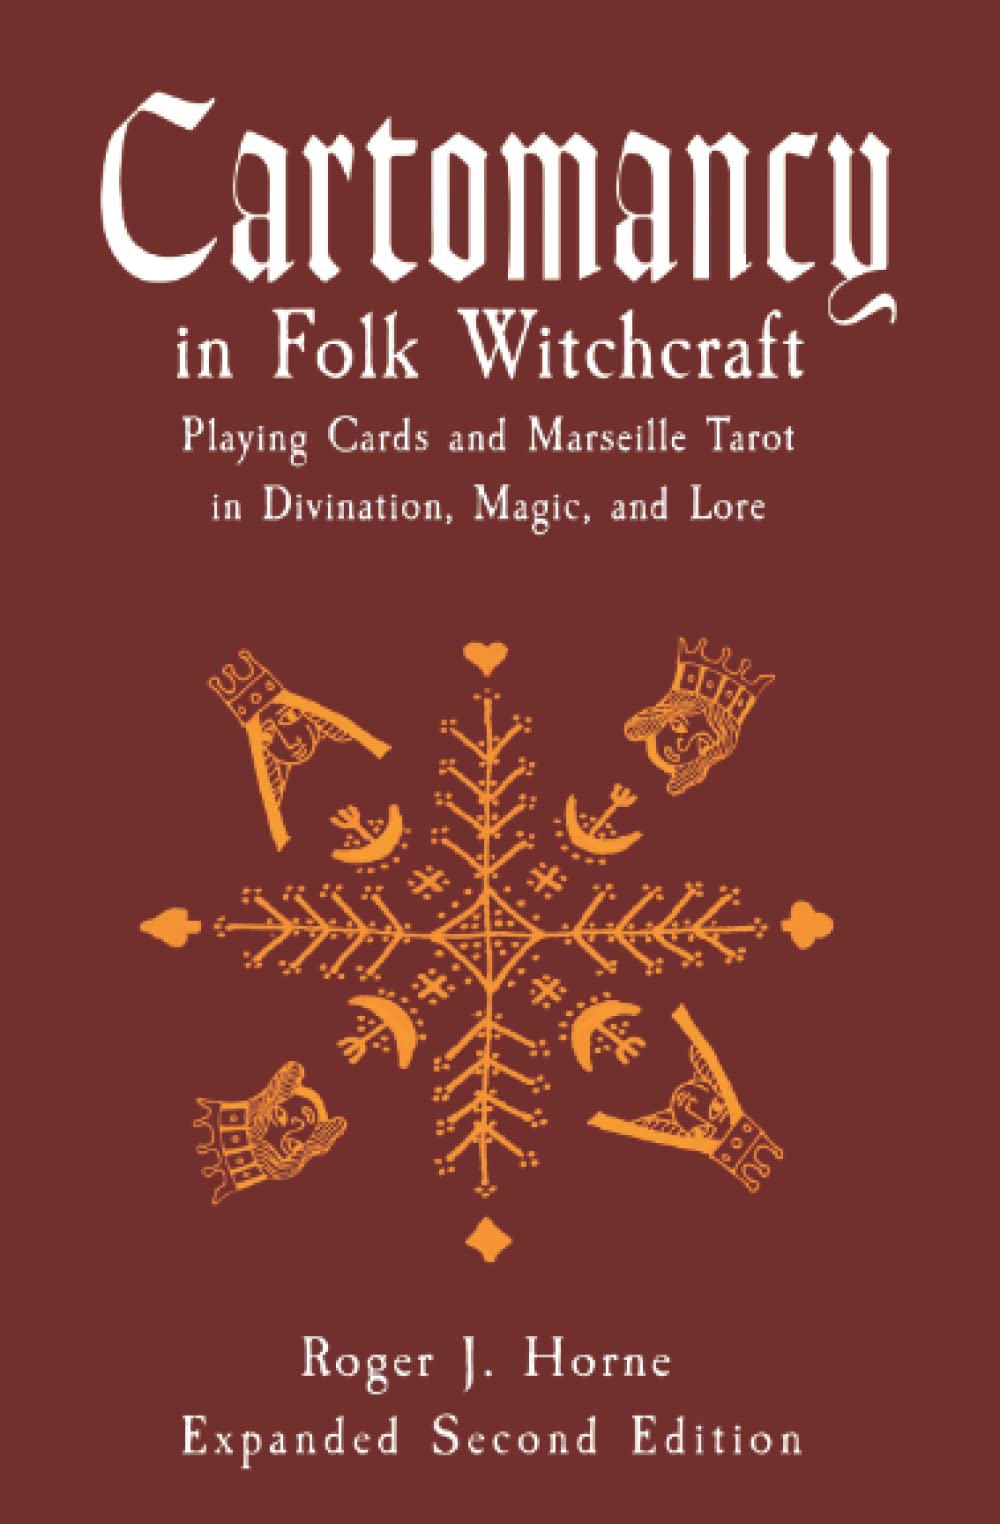 Cartomancy in Folk Witchcraft: Playing Cards and Marseille Tarot in Divination, Magic, and Lore